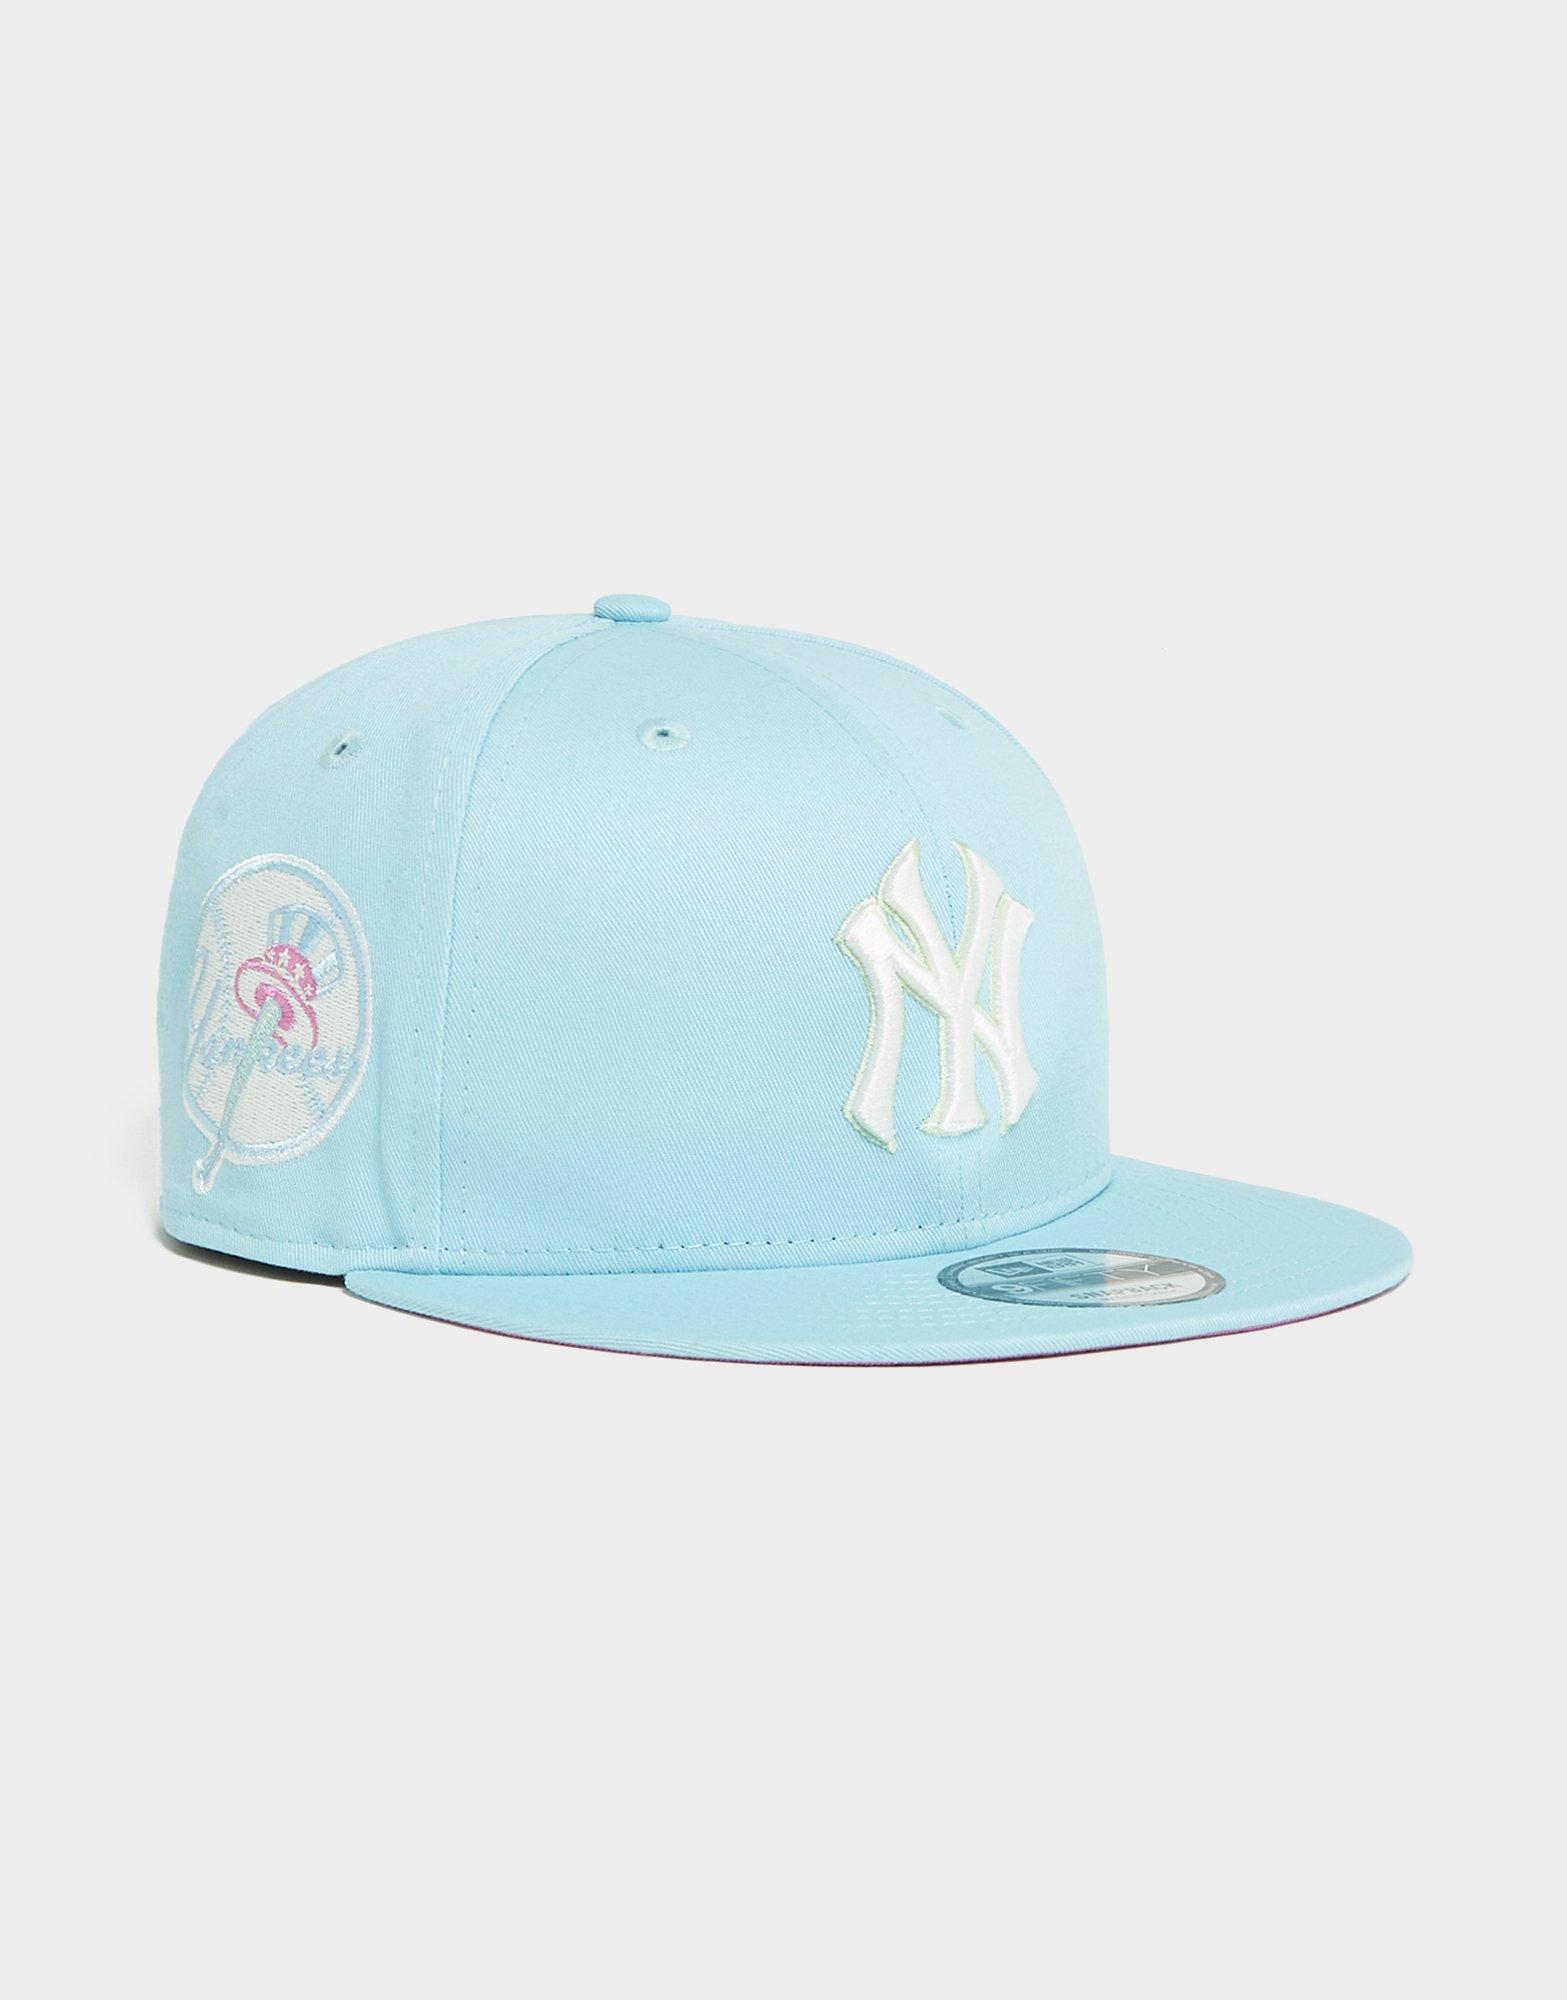 New Era, Accessories, Ny Yankees New Era Baby Blue Fitted 7 38